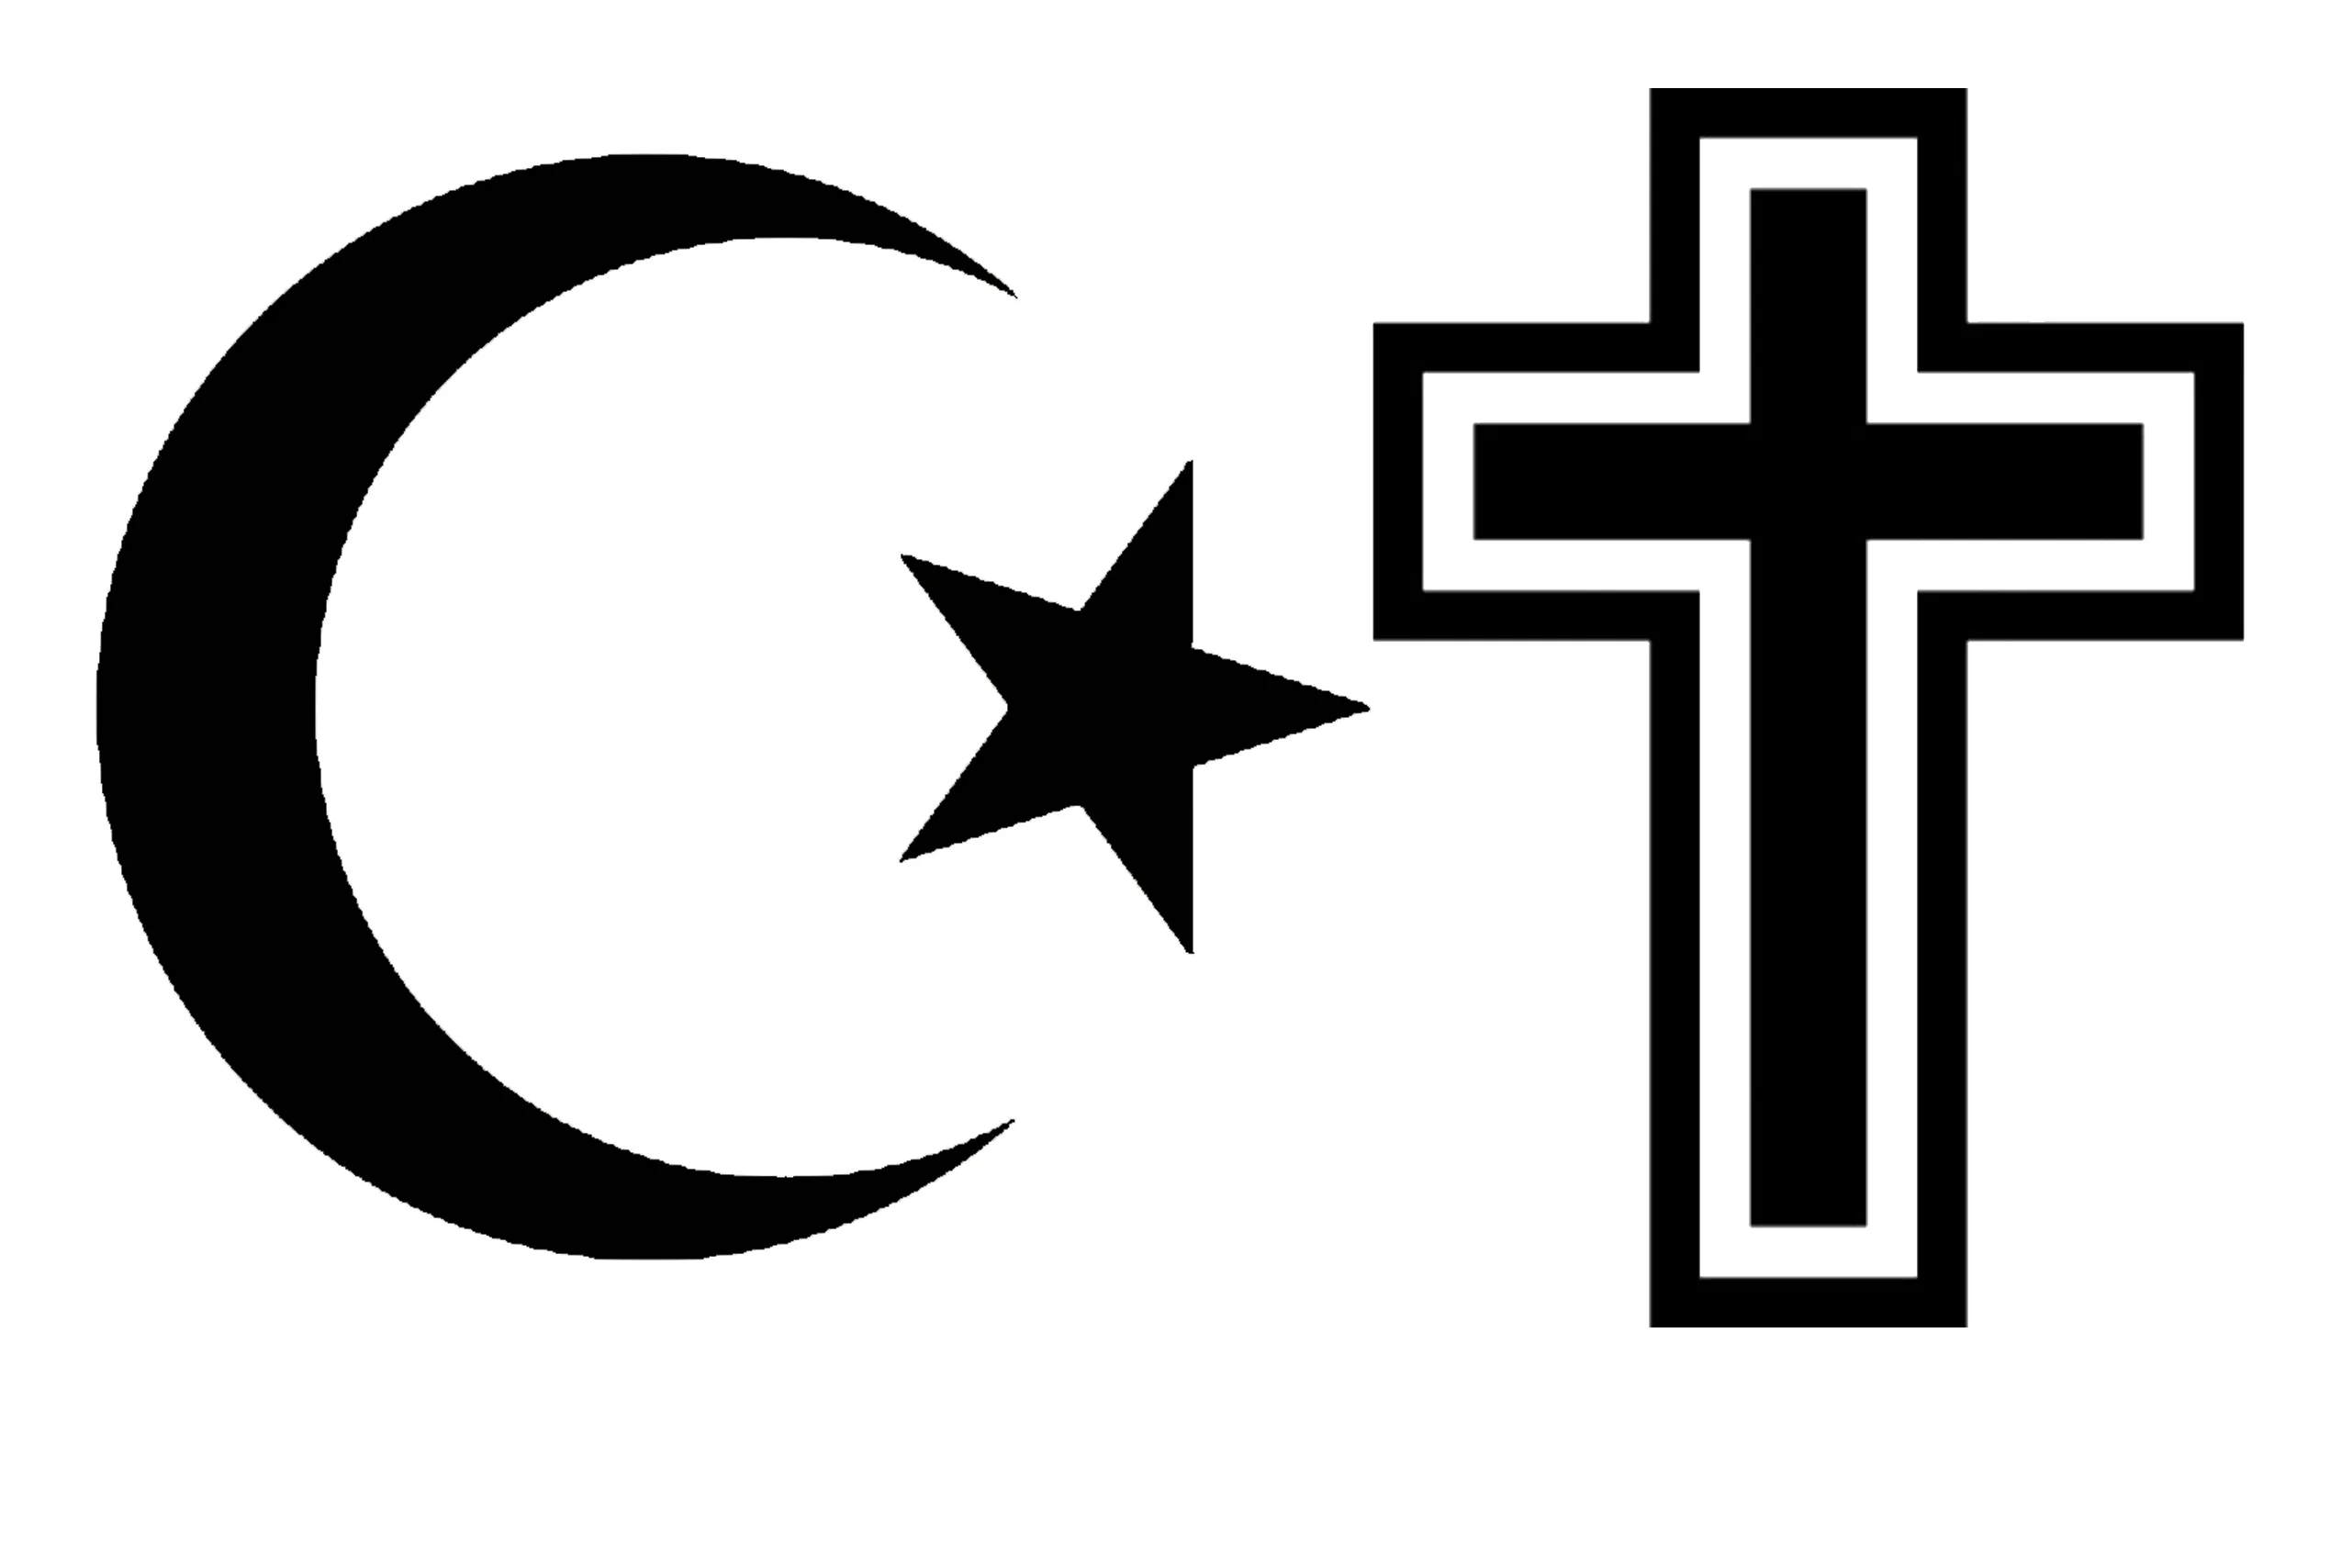 Reassess­ing The Bina­ry : Chris­t­ian Depic­tions of Jesus and Muhammad